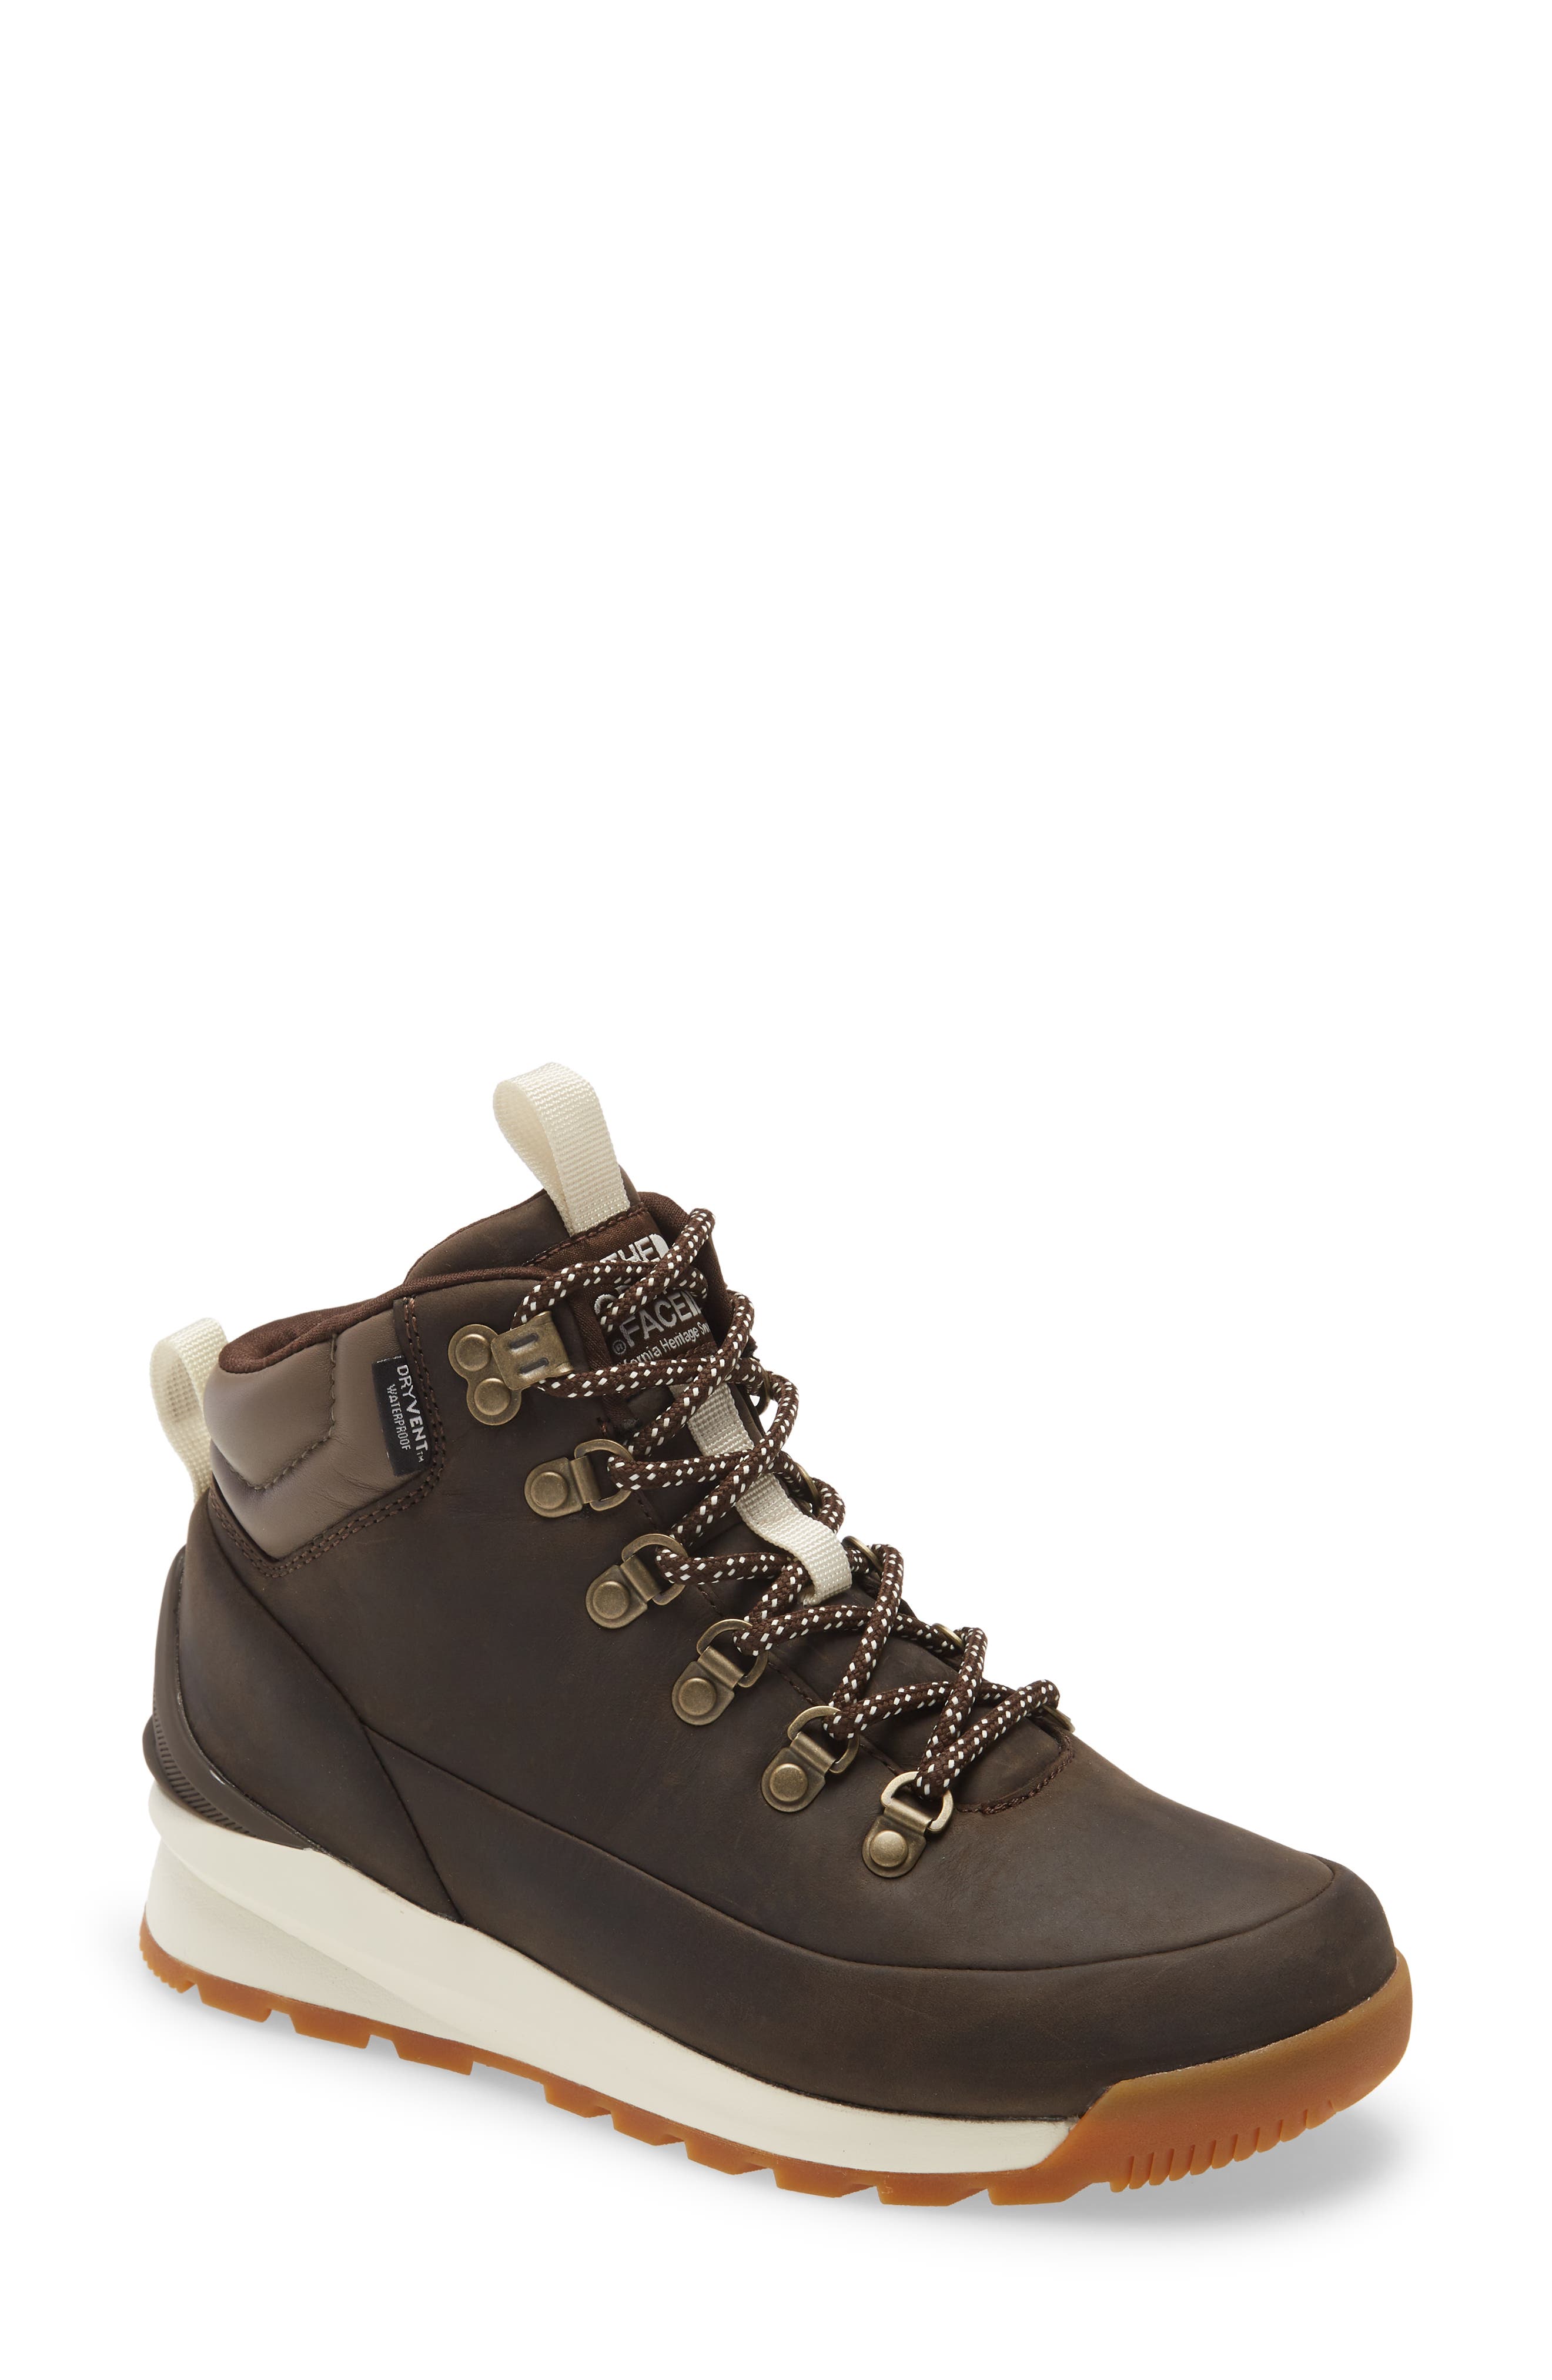 womens north face boots on sale